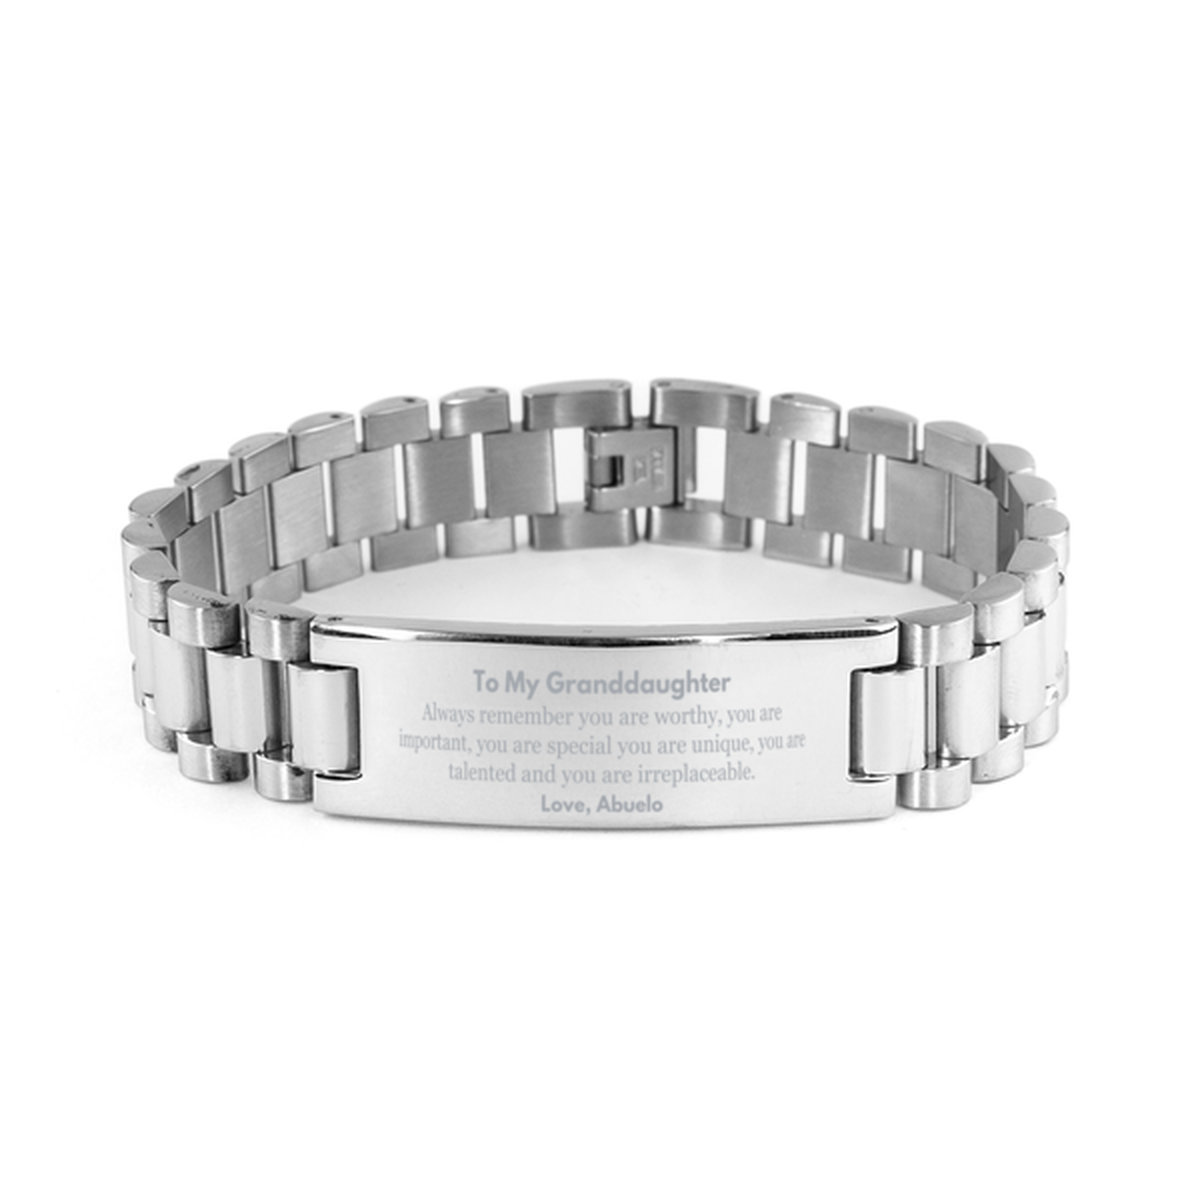 Granddaughter Birthday Gifts from Abuelo, Inspirational Ladder Stainless Steel Bracelet for Granddaughter Christmas Graduation Gifts for Granddaughter Always remember you are worthy, you are important. Love, Abuelo